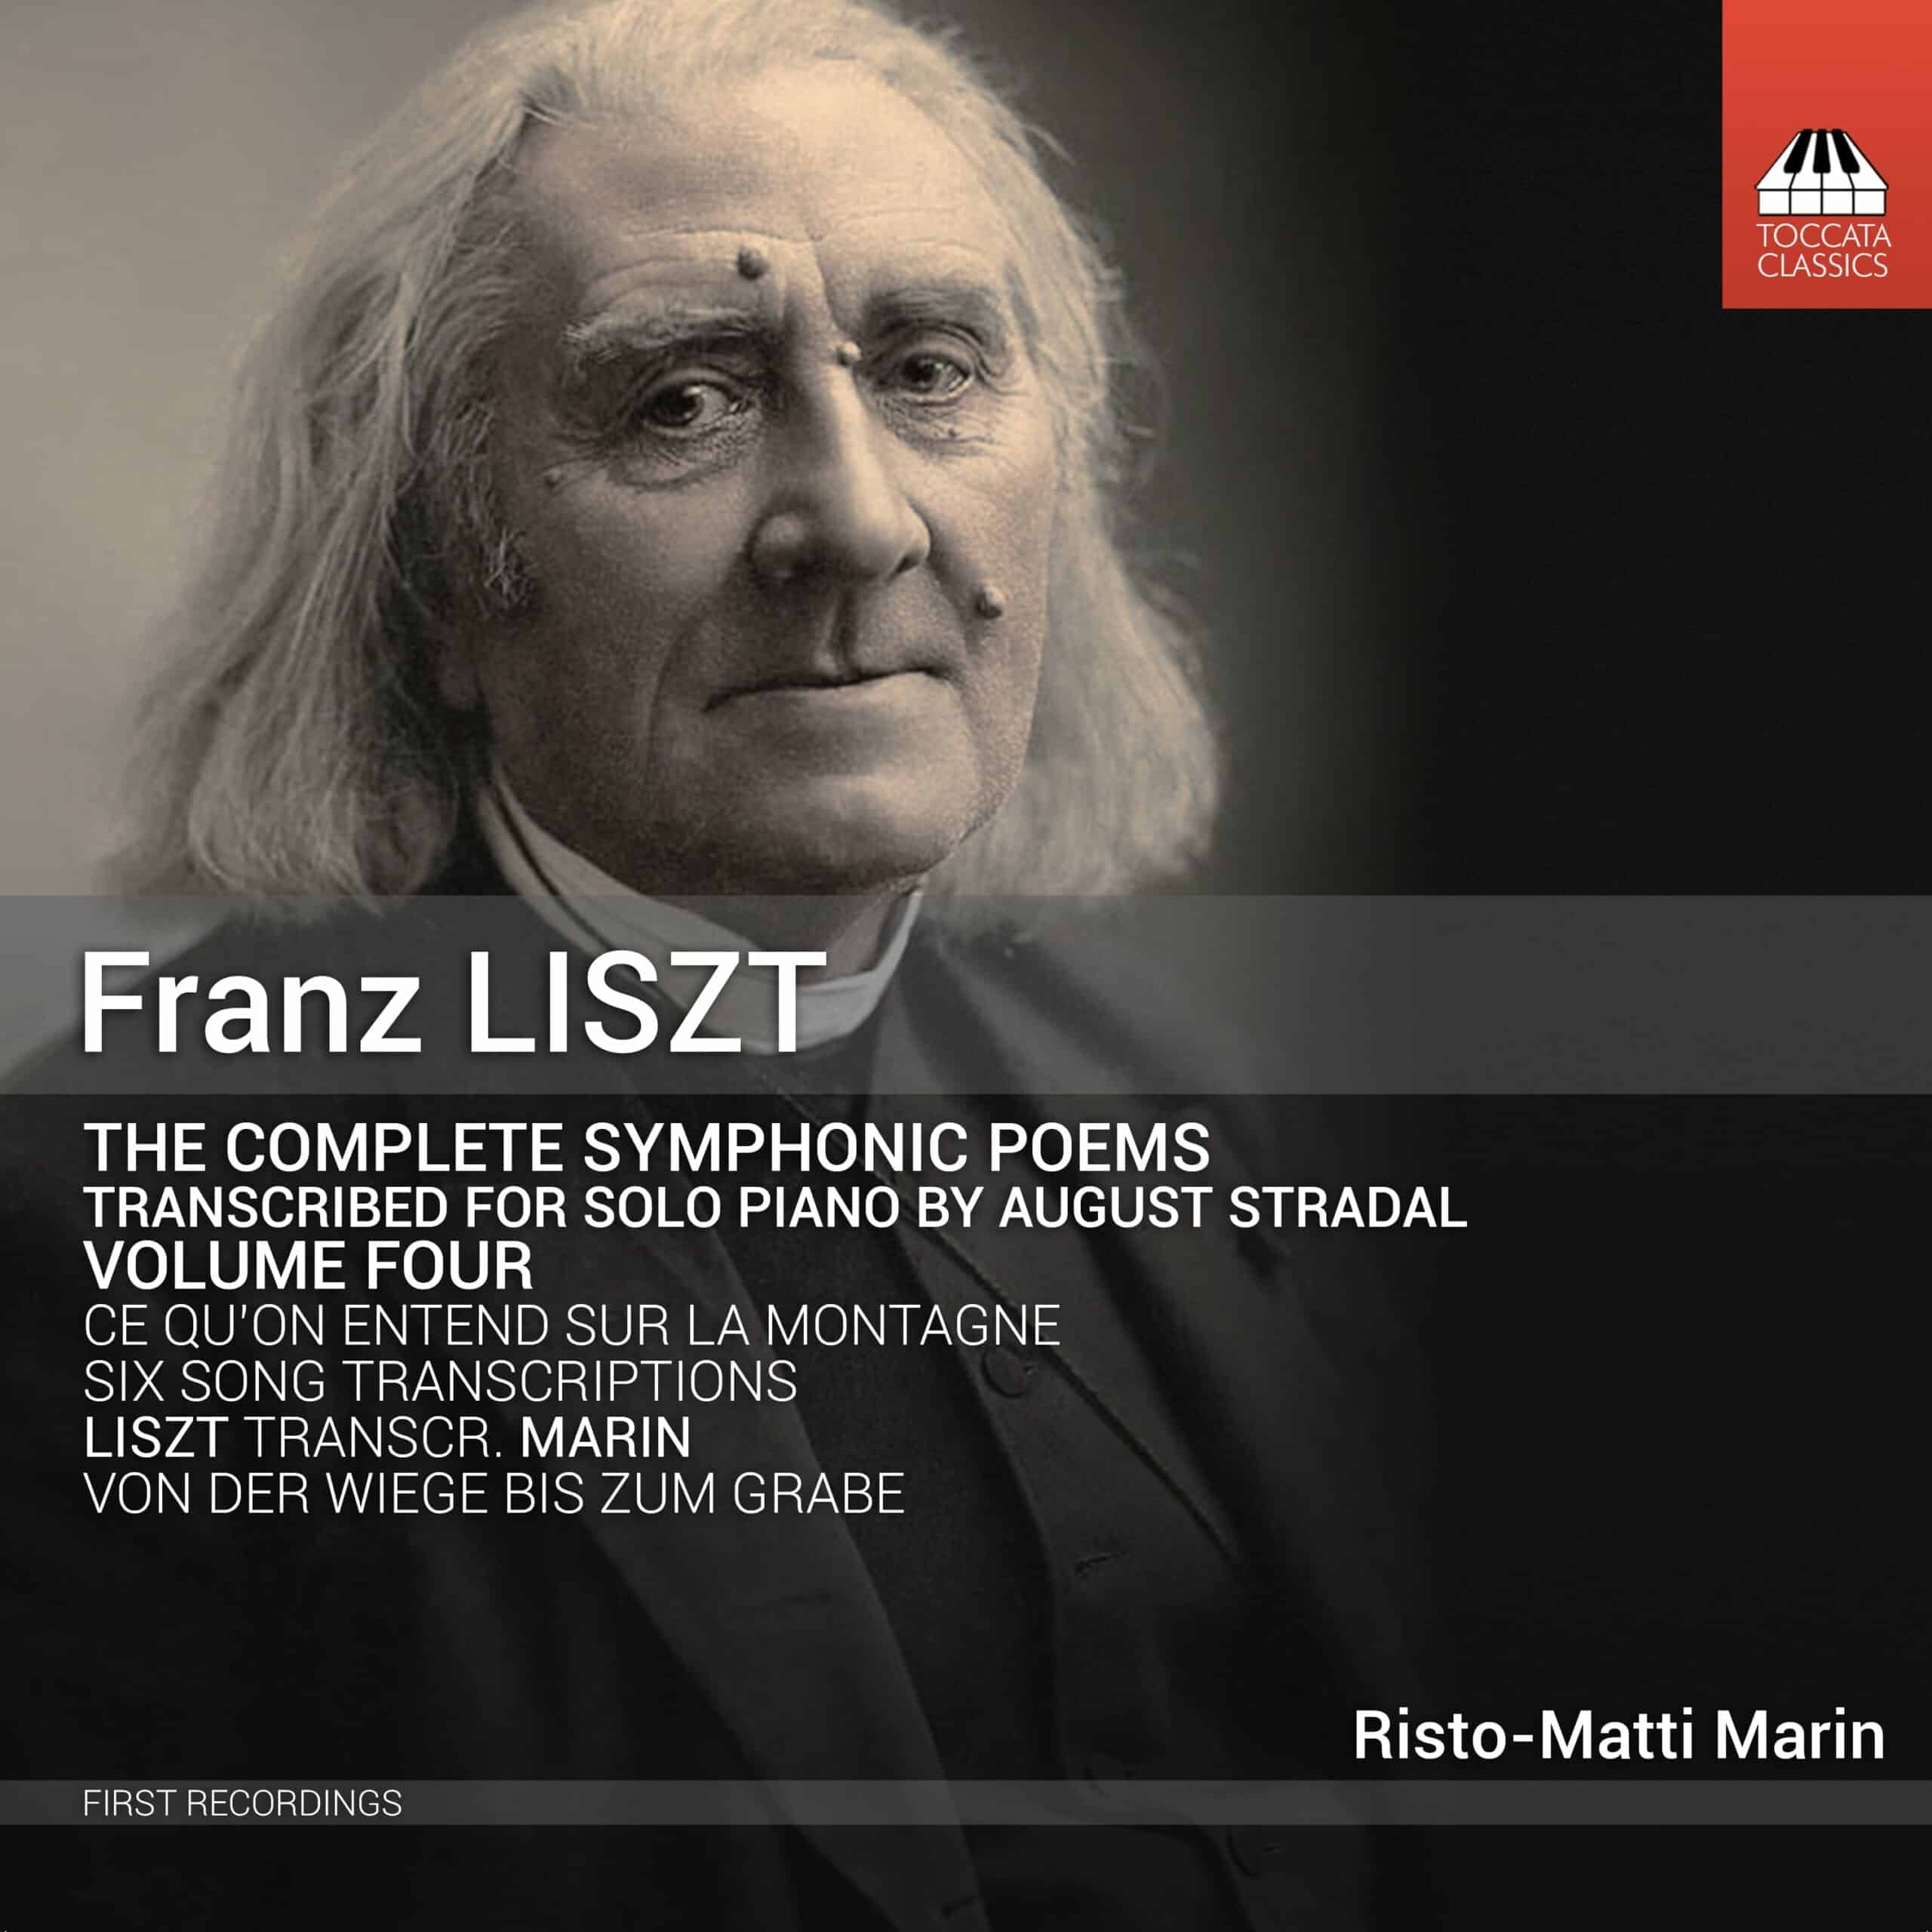 Franz Liszt: Complete Symphonic Poems Transcribed by August Stradal, Vol. 4